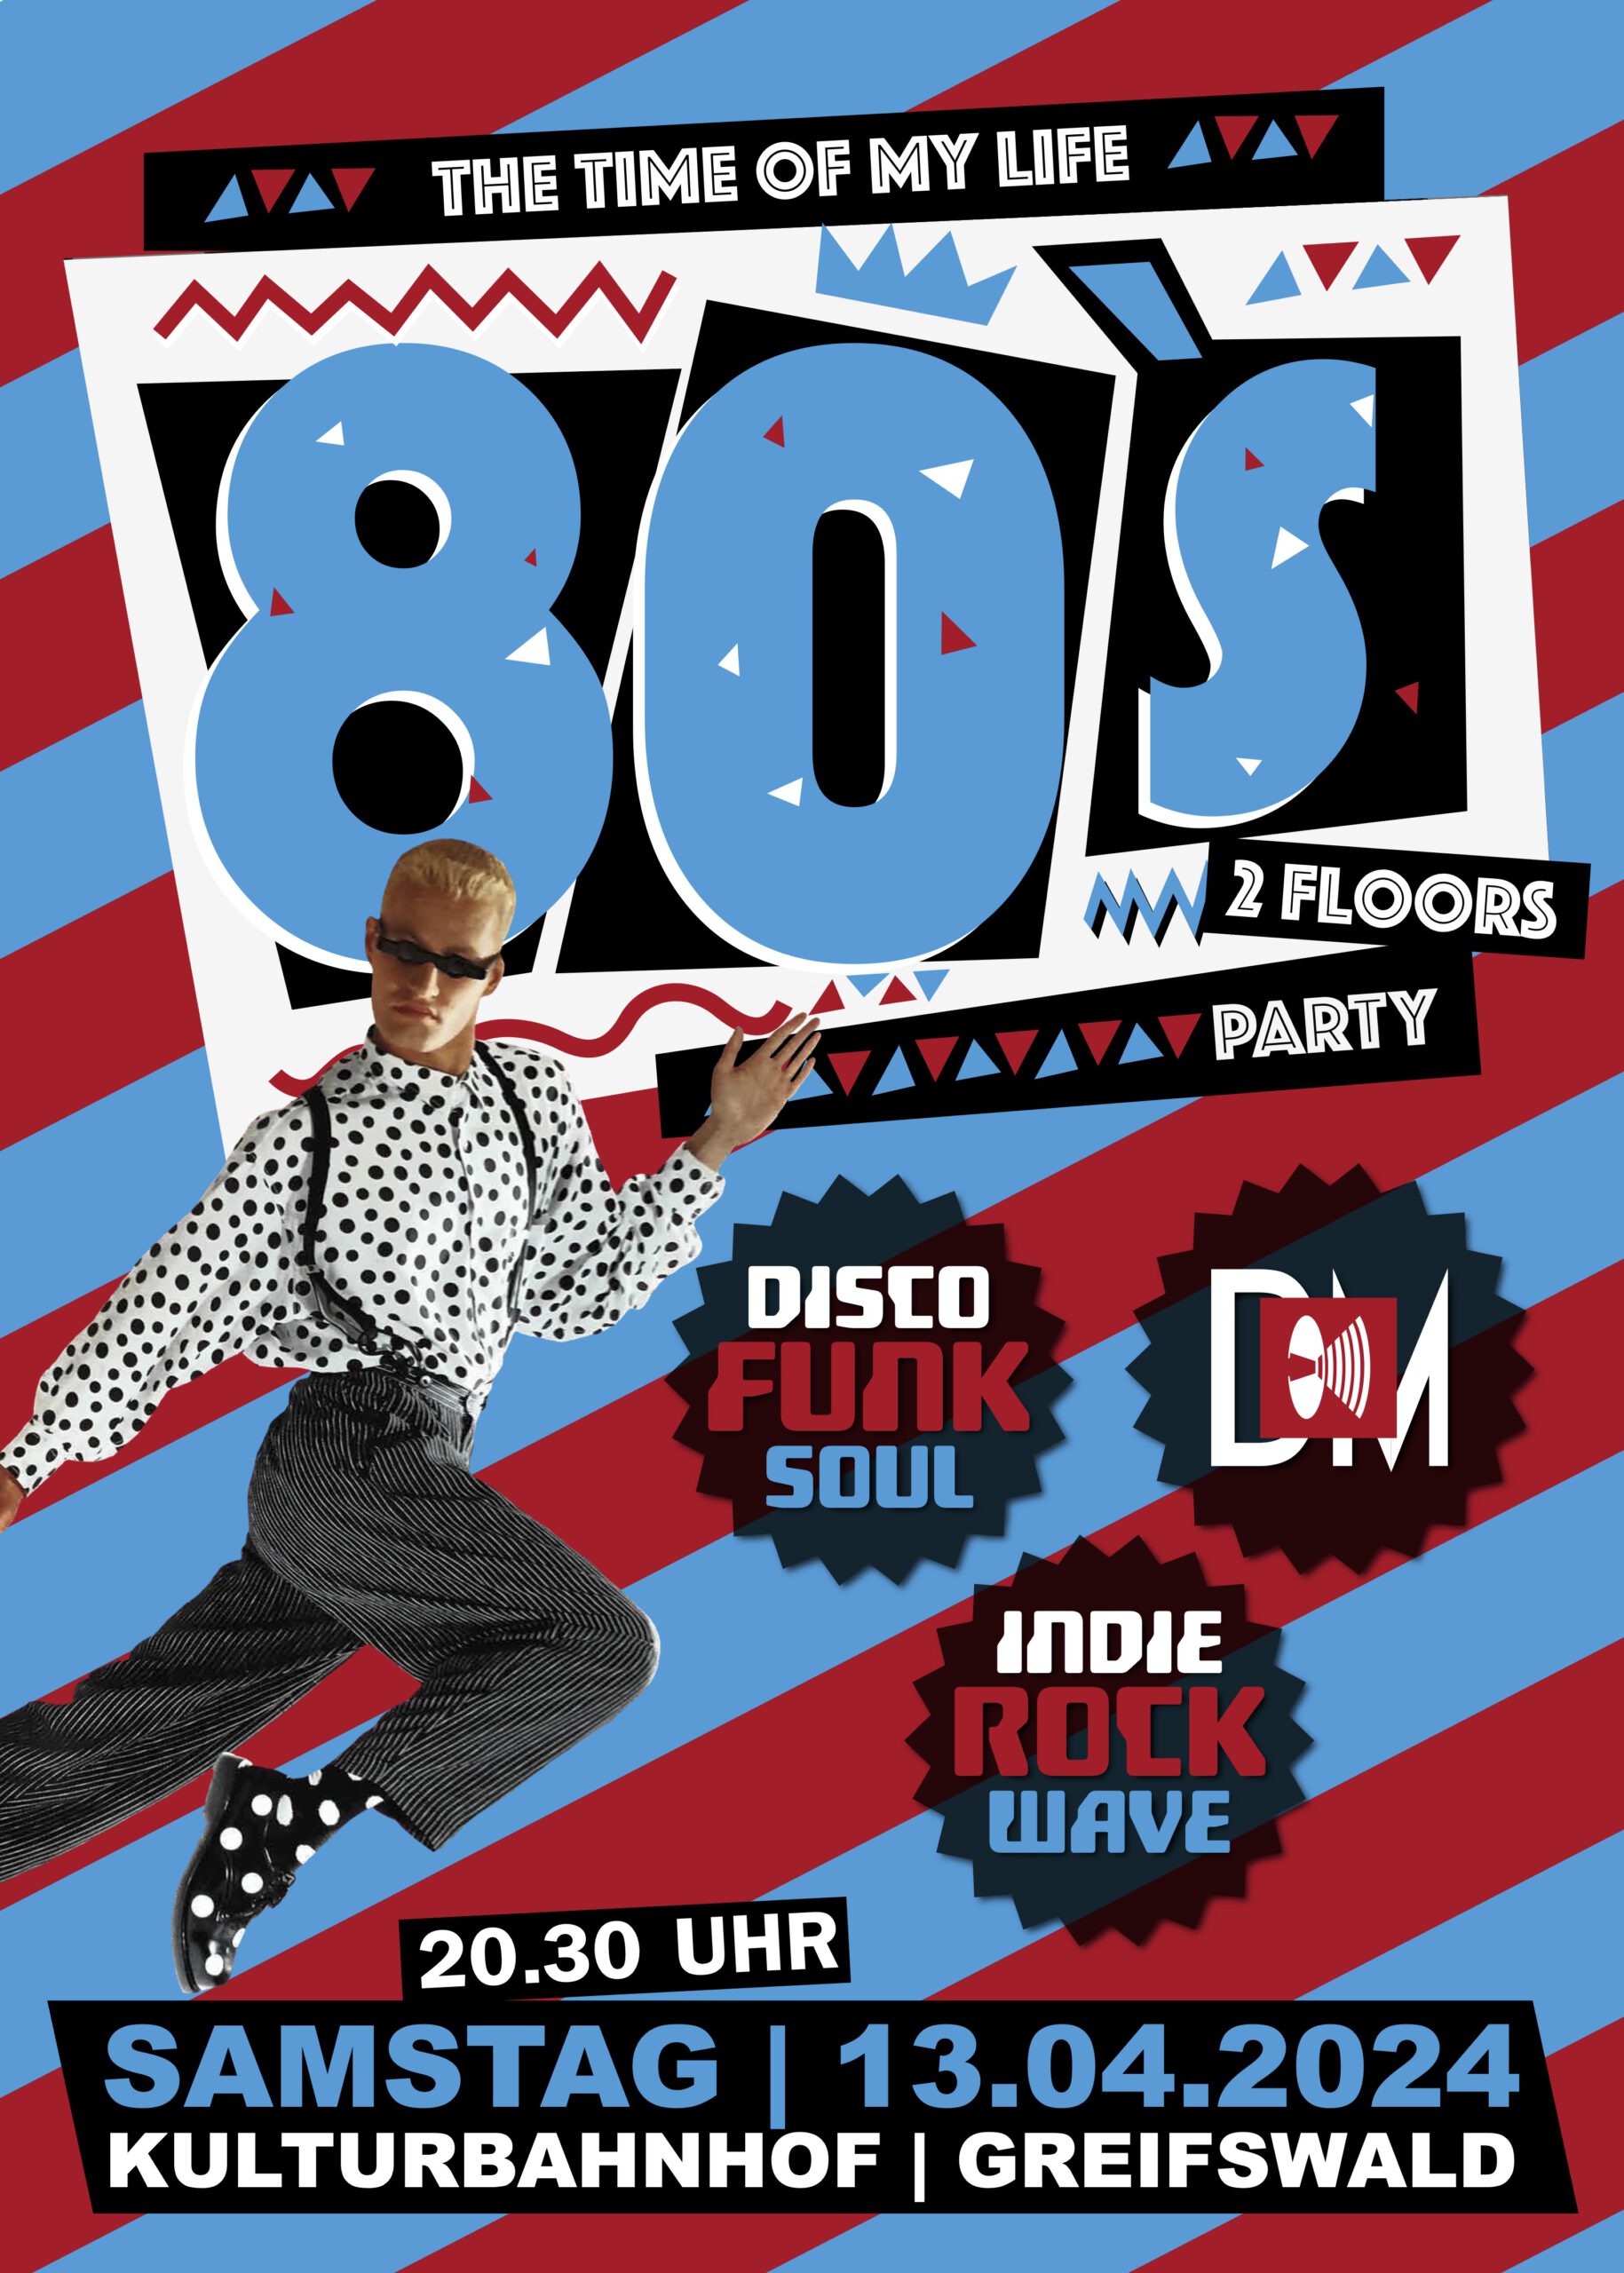 The Time of my Life - 80s Party